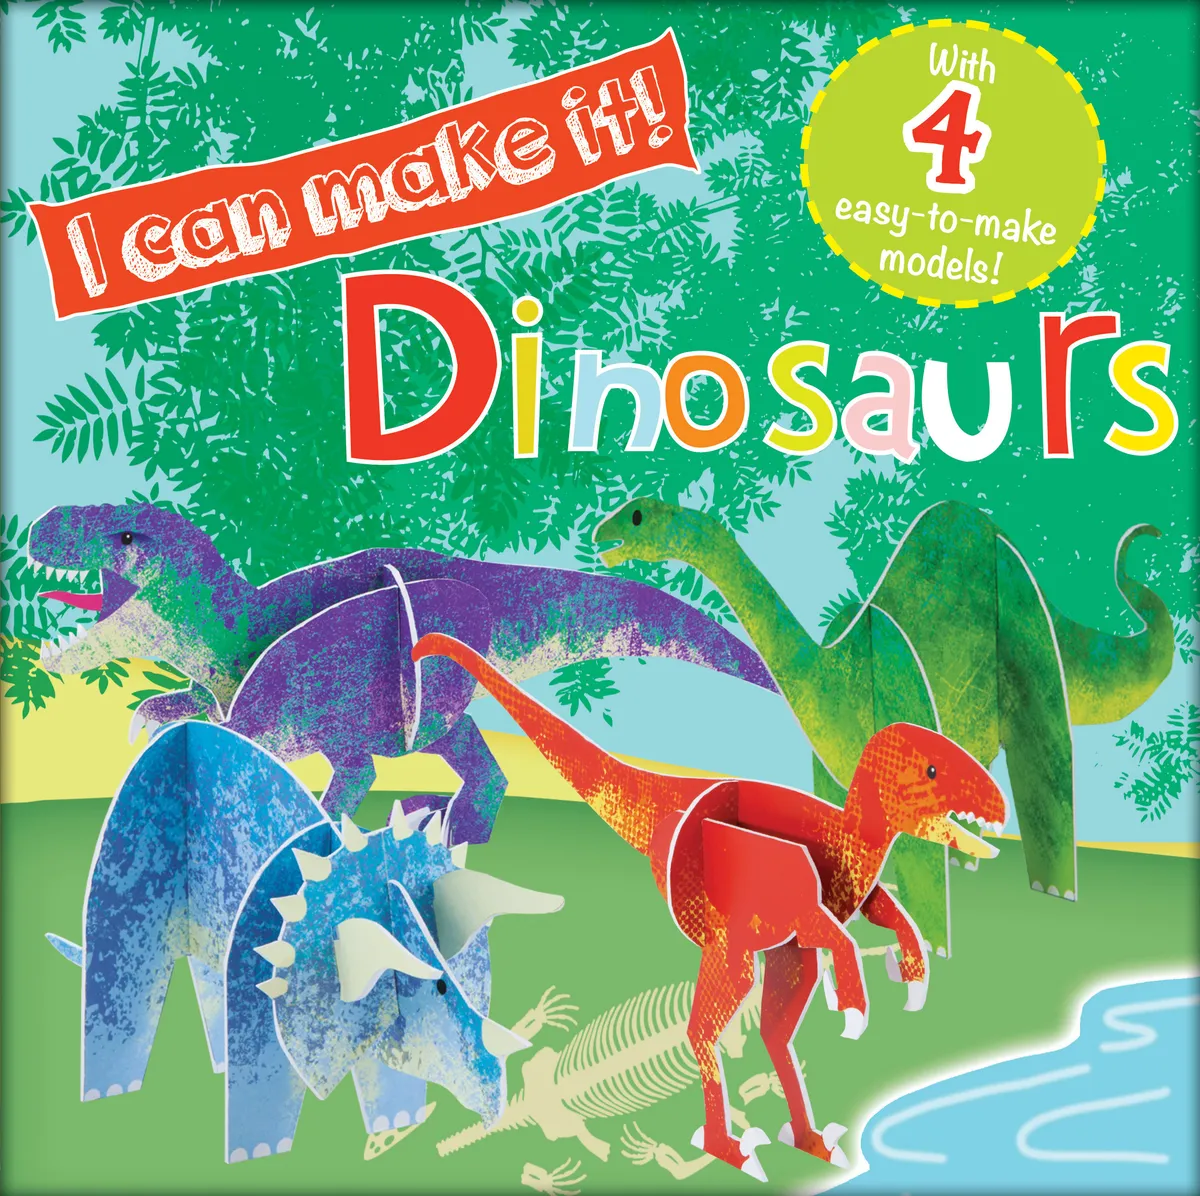 I Can Make It: Dinosaurs